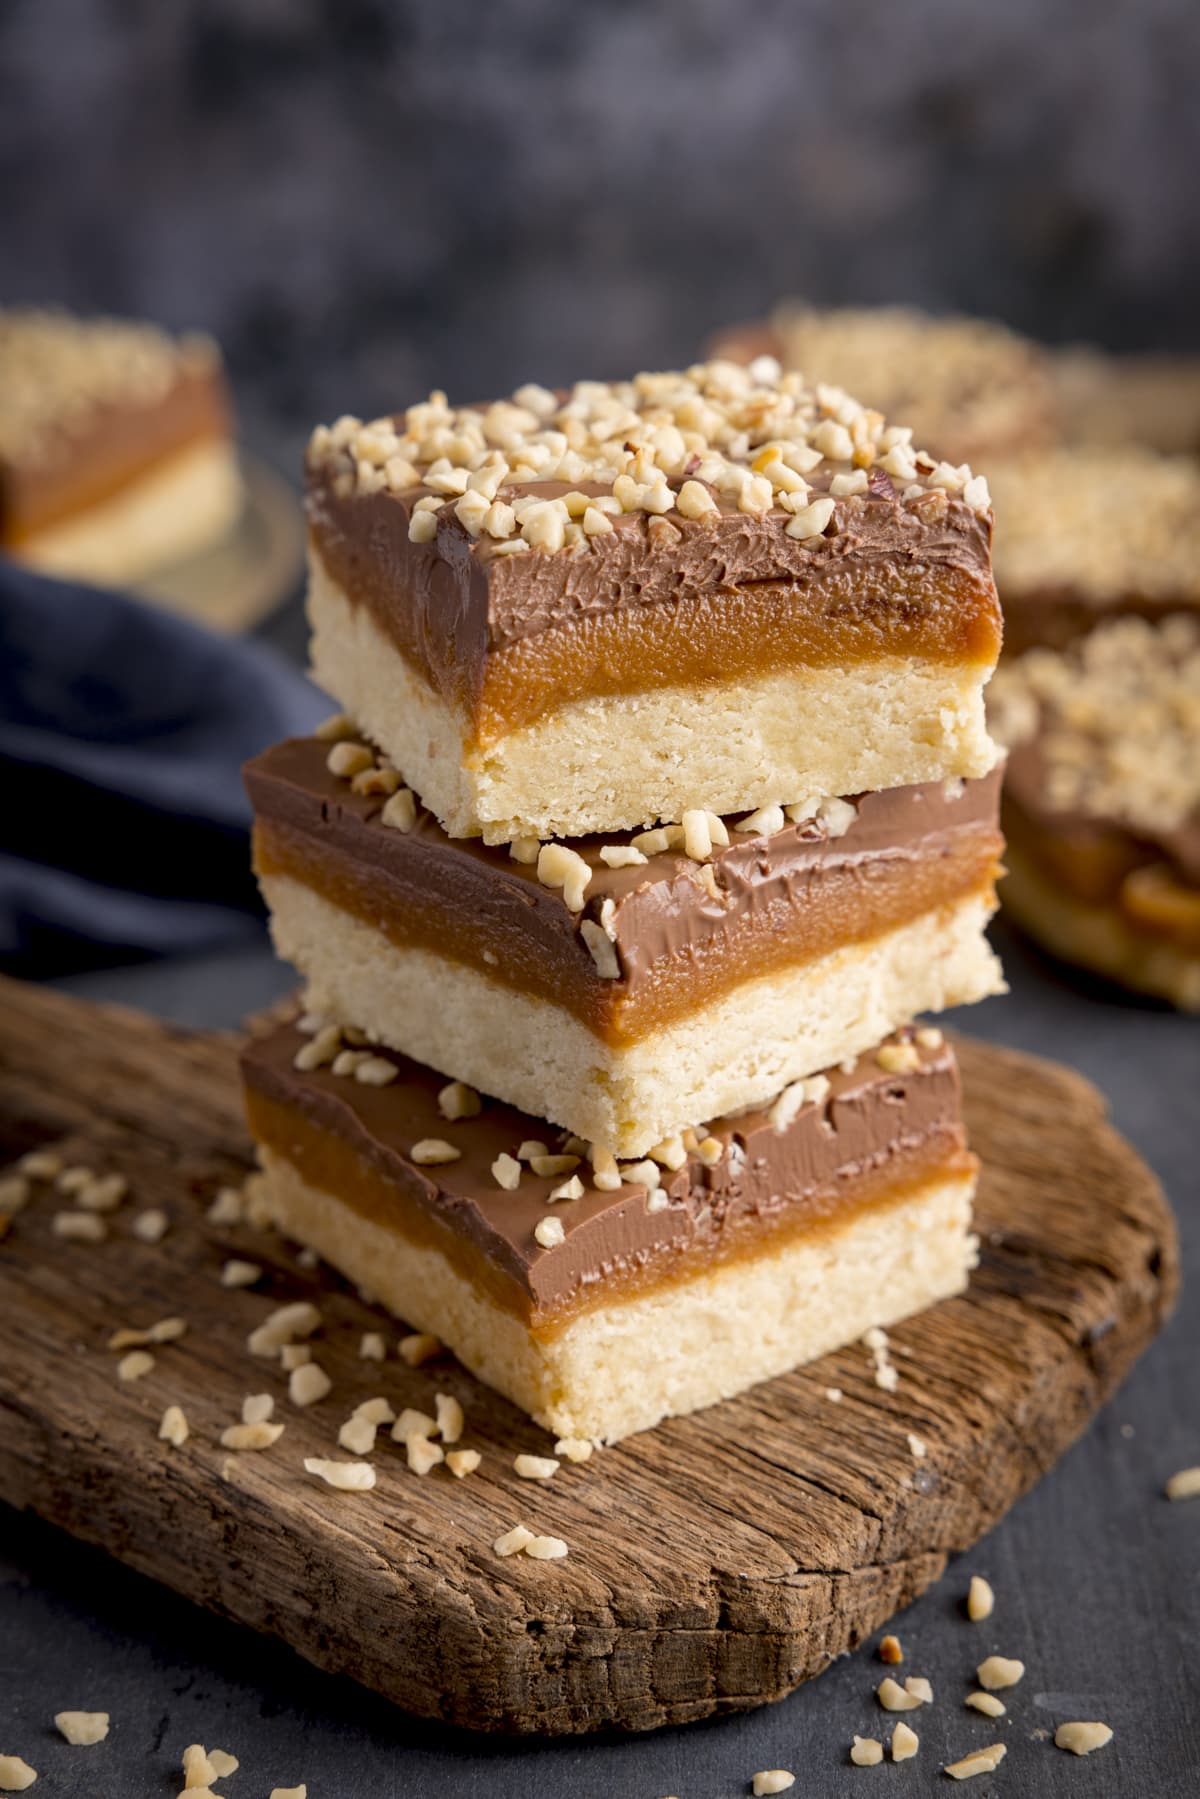 Three pieces of millionaire's shortbread, topped with chopped hazelnuts, piled up on a small rustic wooden board. The board is on a dark background, and there are further millionaire's shortbreads in the background.